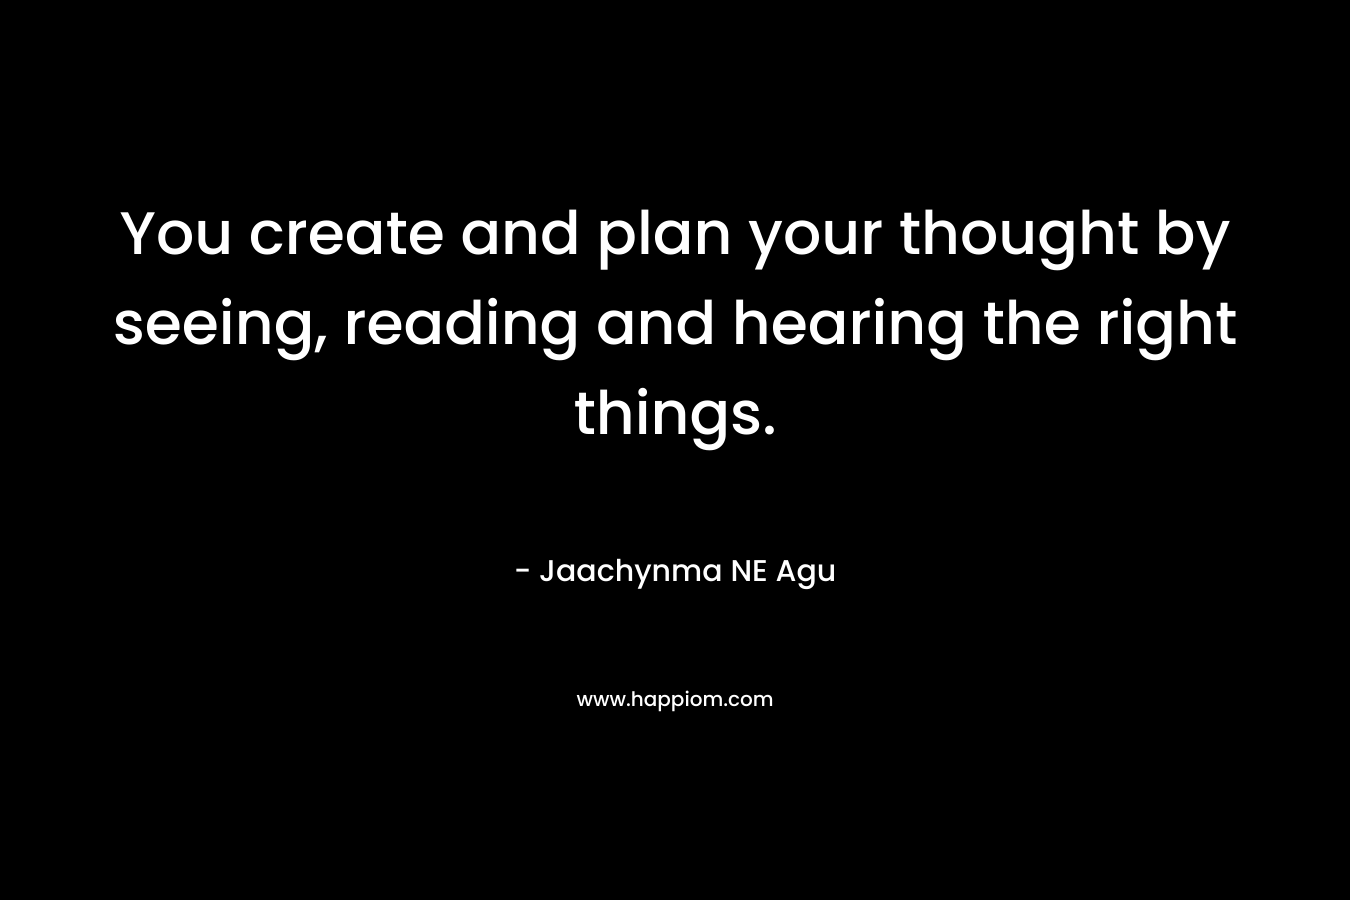 You create and plan your thought by seeing, reading and hearing the right things.